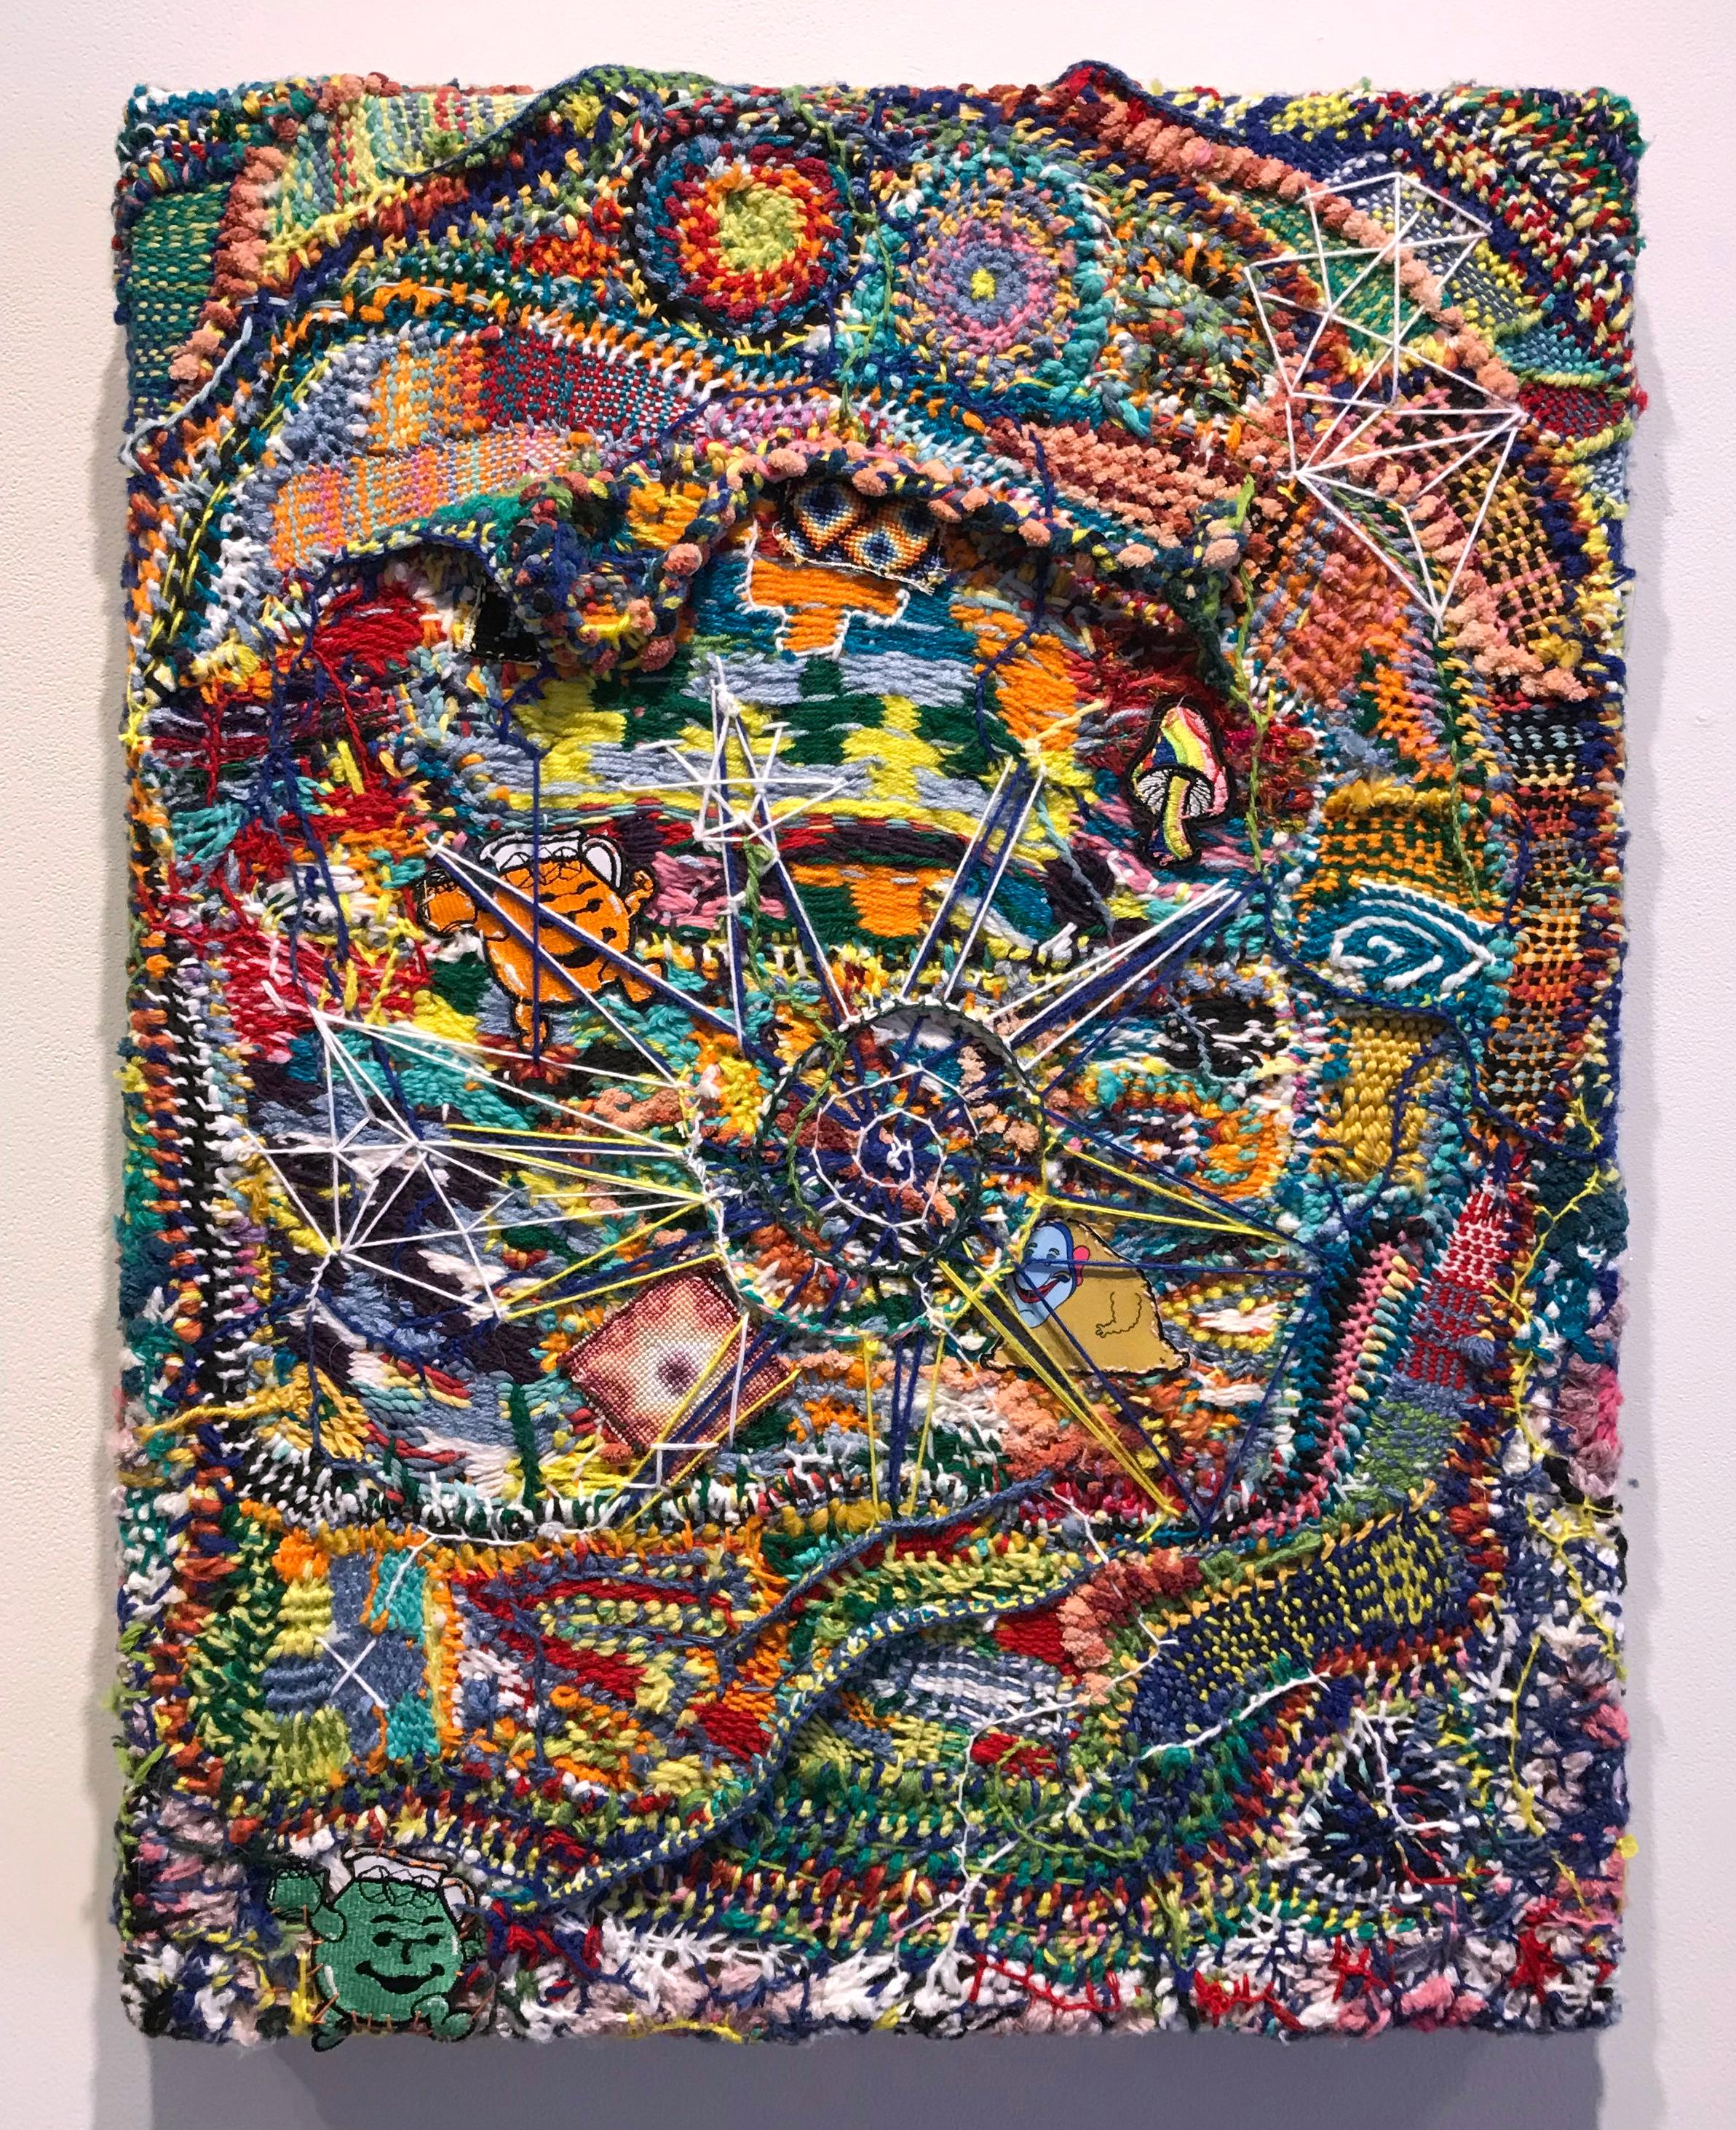 "The Key is in My Pocket", Contemporary, Abstract, Hand Woven, Textile, Stitched - Mixed Media Art by Ethan Meyer